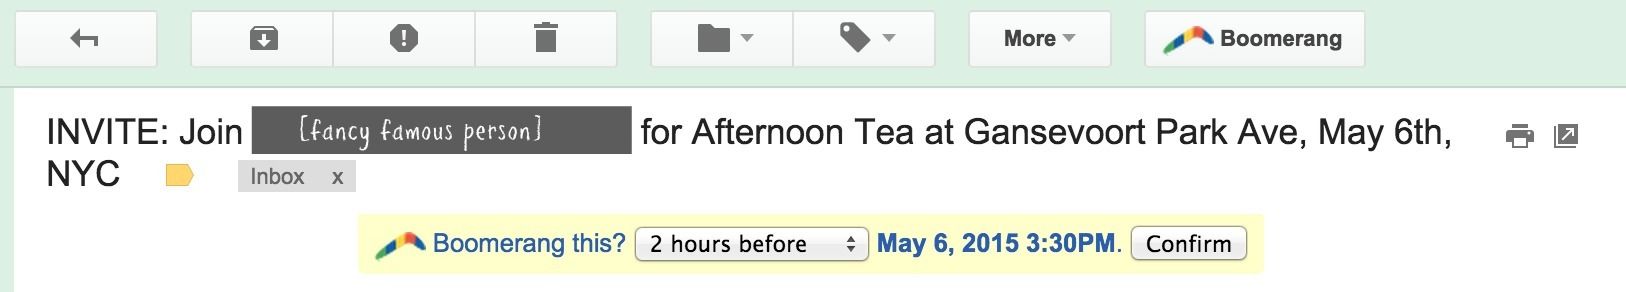 Boomerang for Gmail: Predictive return to inbox feature based on time and dates in the email